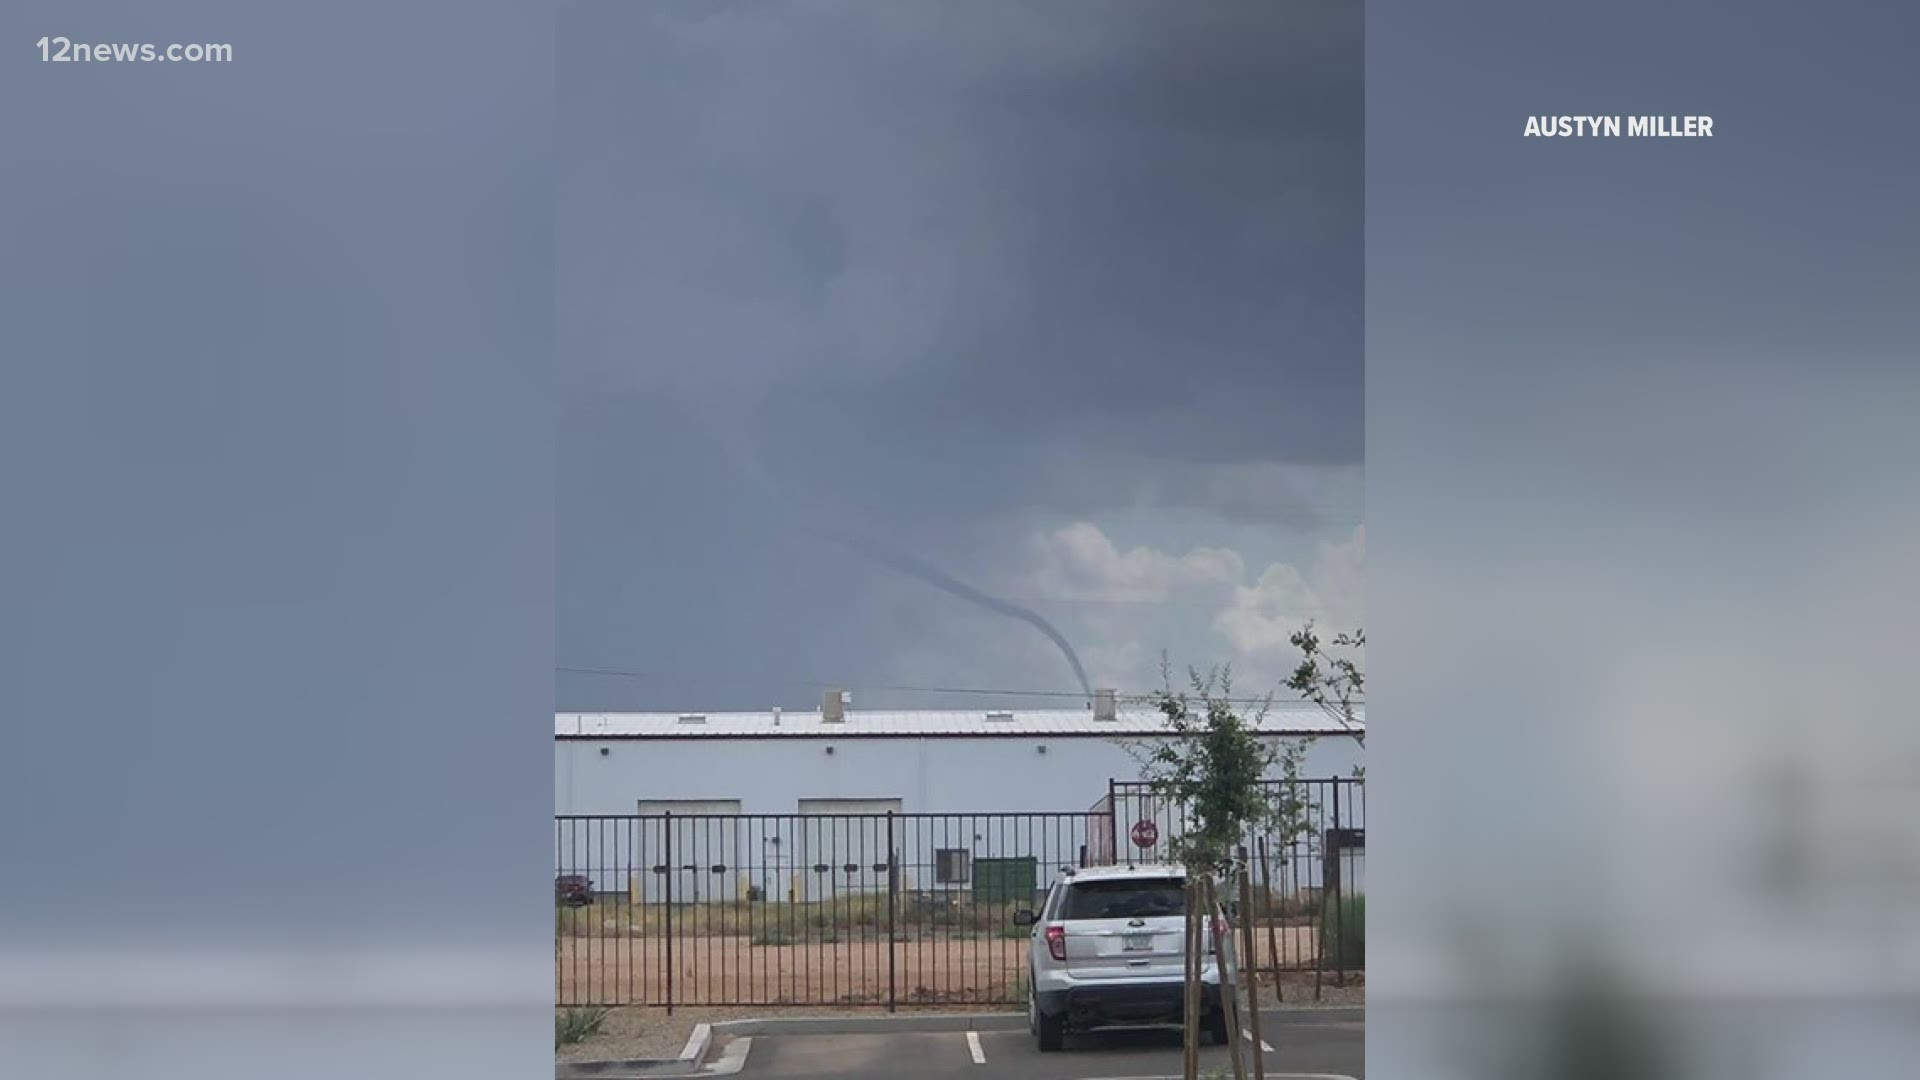 The NWS in Las Vegas said the tornado touched down about 10 miles east of Kingman and is moving to the north/northeast at 10 miles per hour. Jamie Kagol has more.